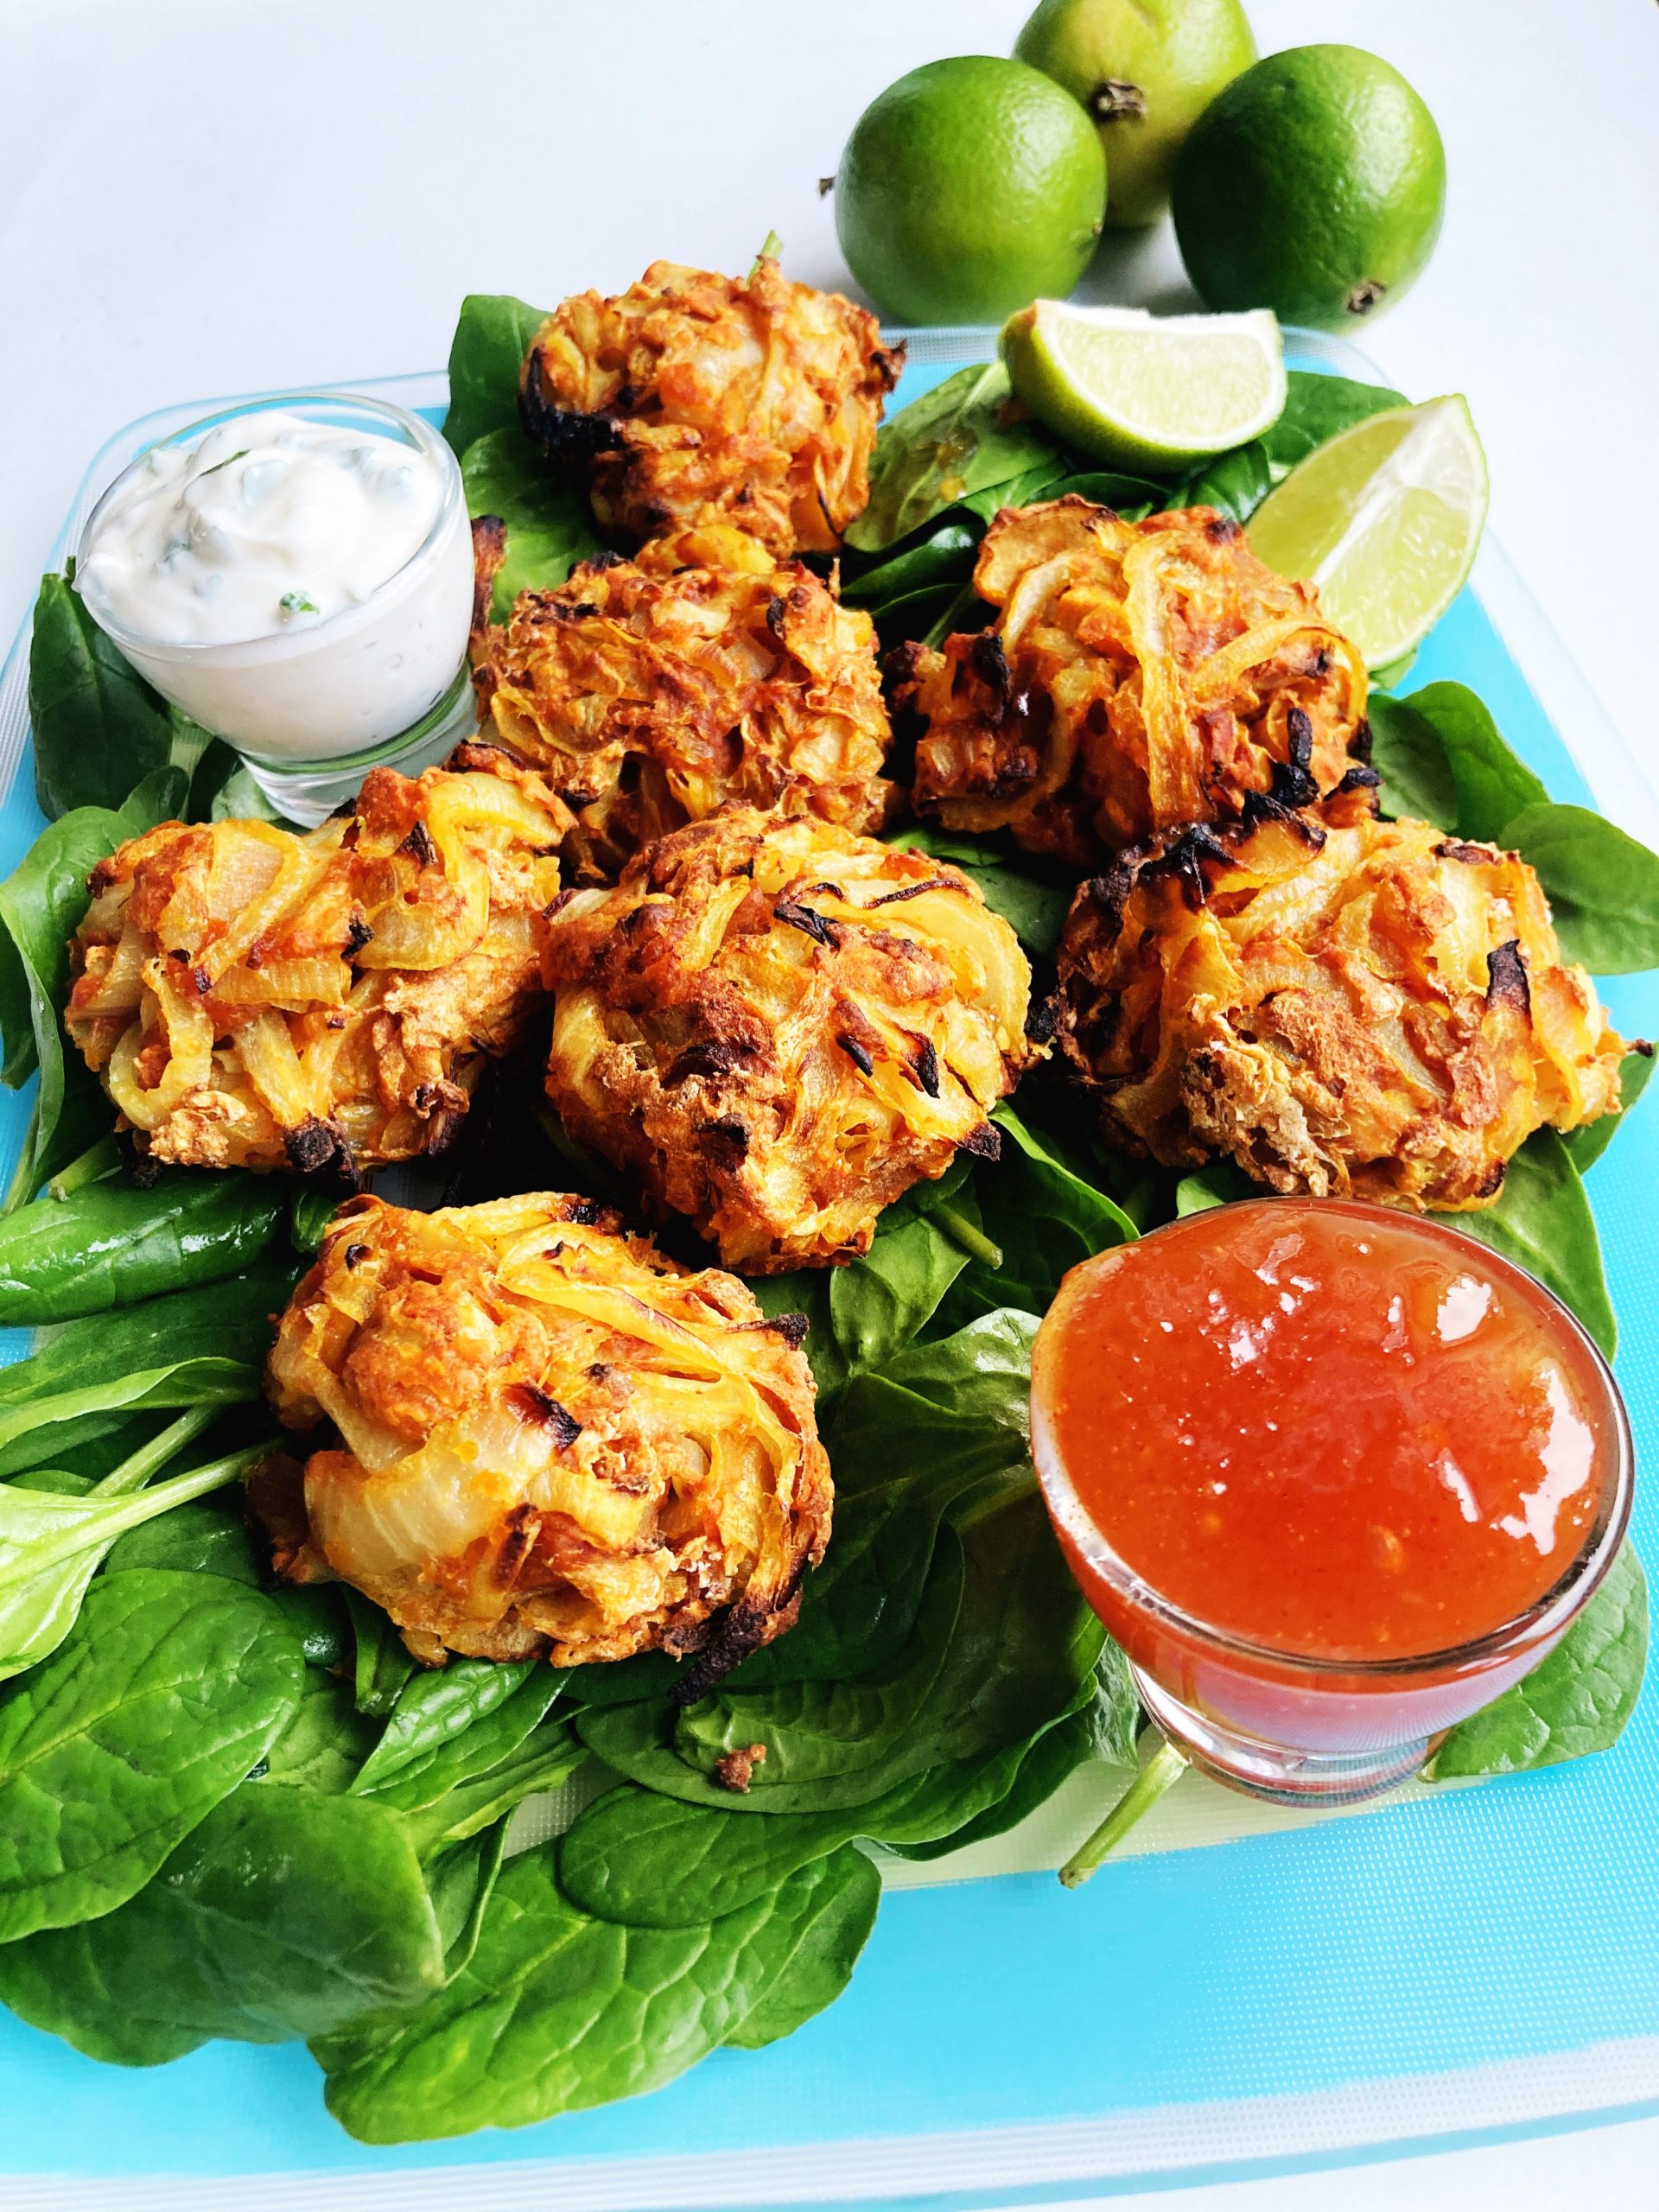 A recipe and how to make healthy baked Onion Bhajis